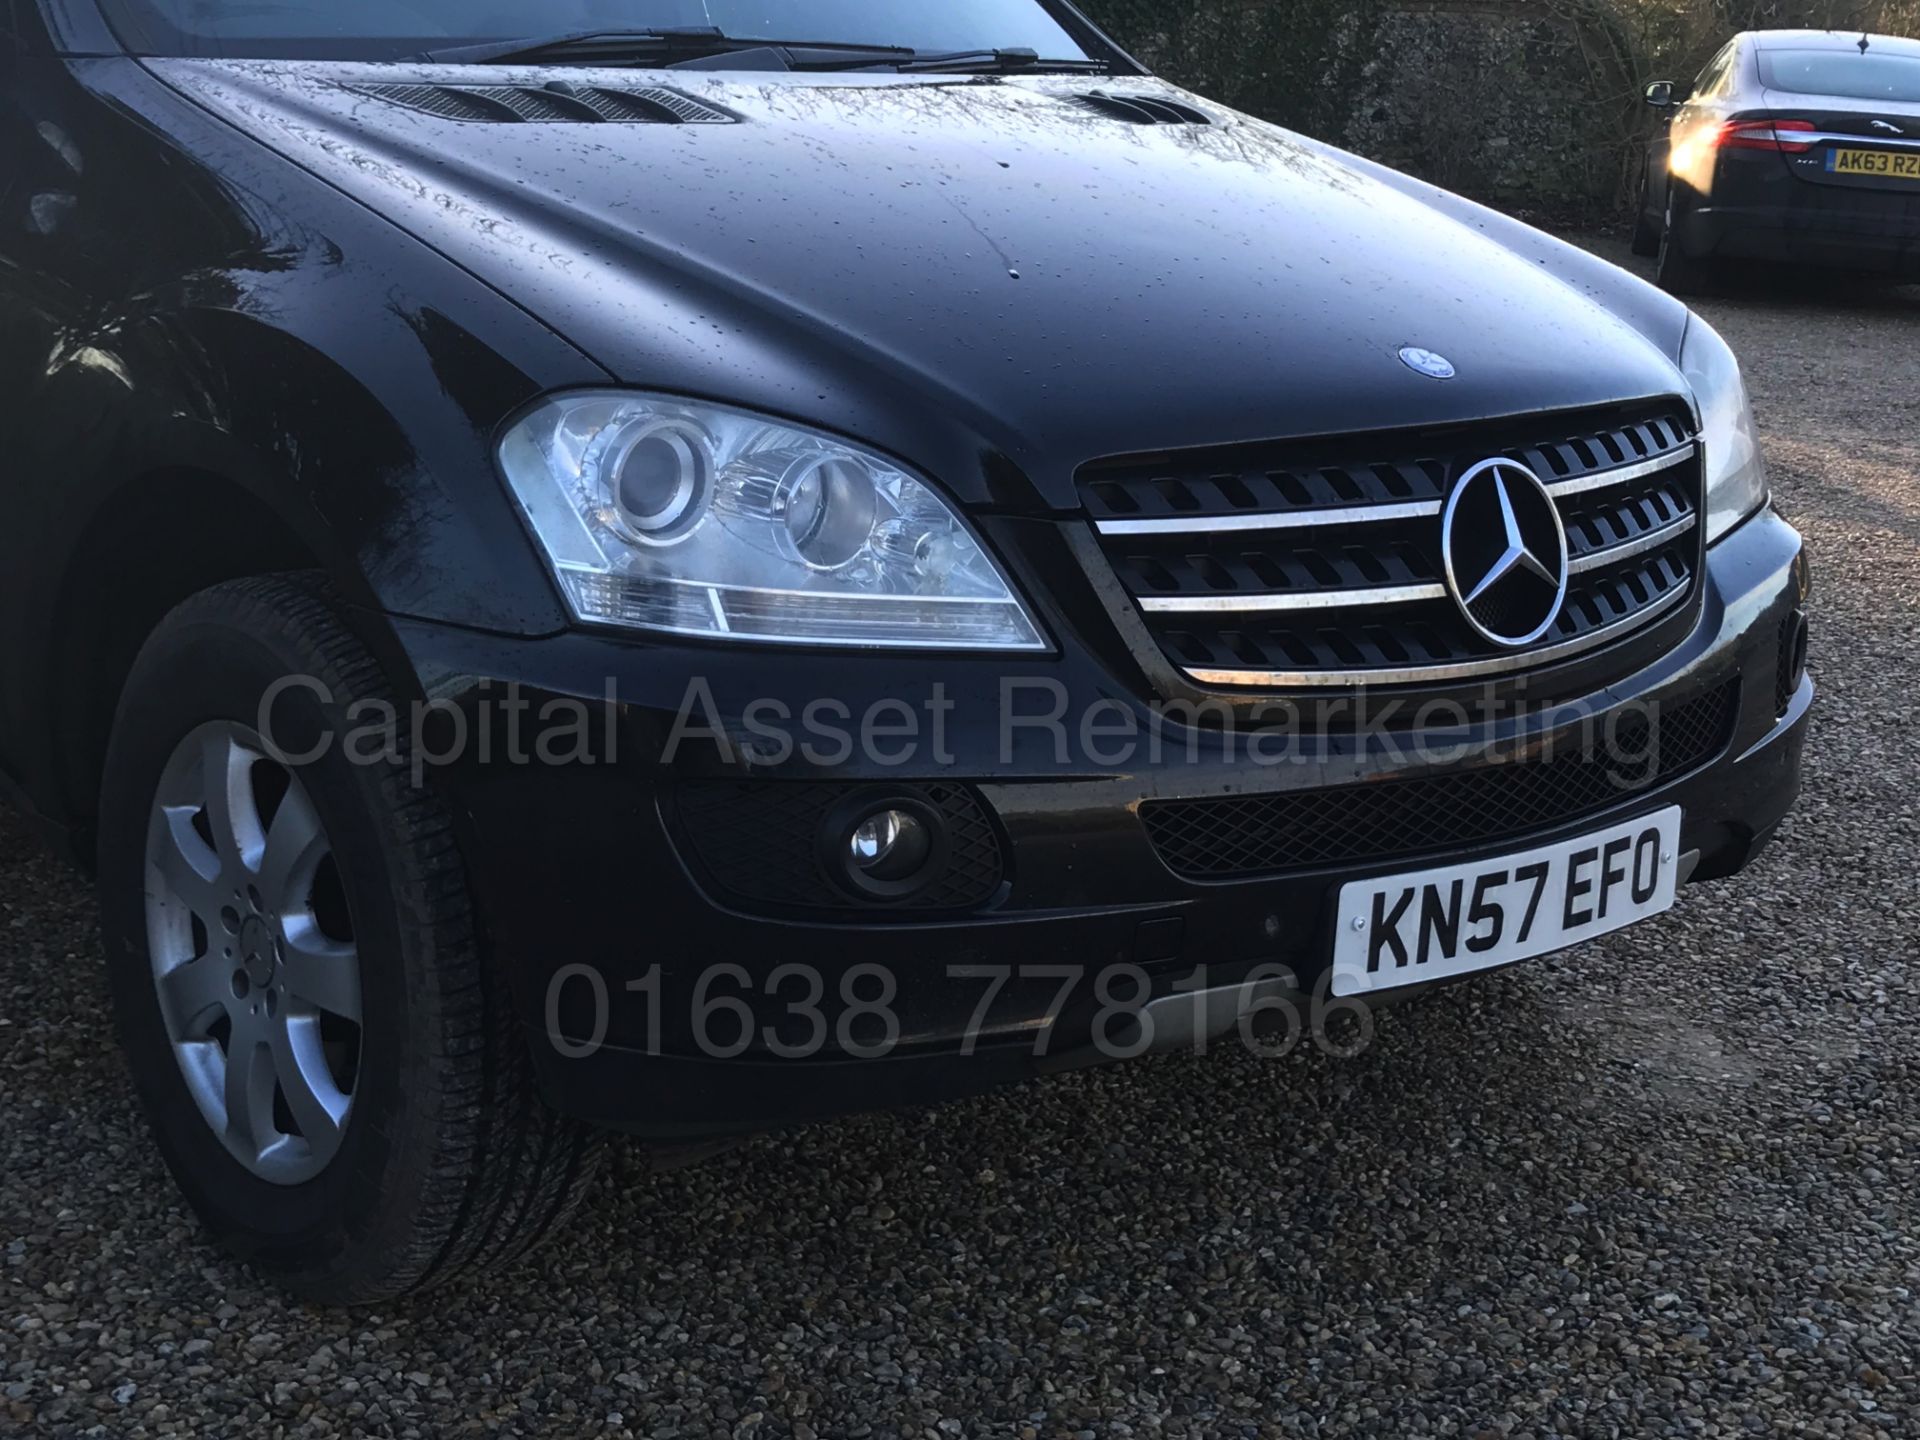 (On Sale) MERCEDES-BENZ ML 320 CDI 'SPECIAL EQUIPMENT' (2008 MODEL) '3.0 DIESEL - AUTO - LEATHER’ - Image 11 of 37